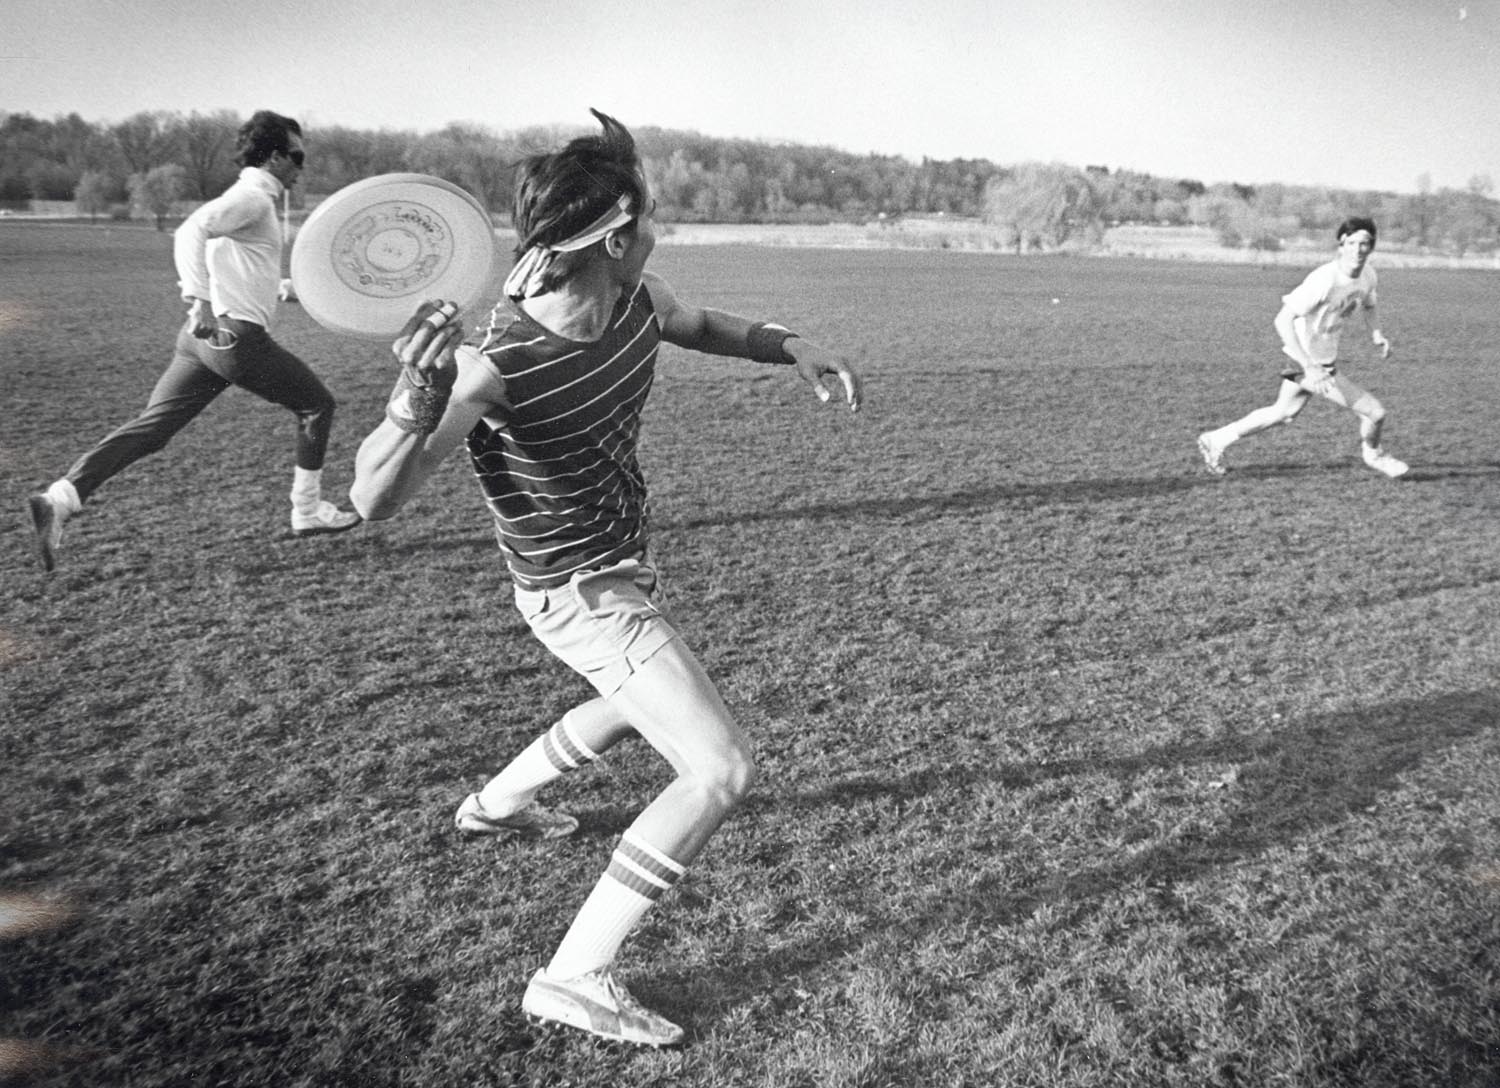 Person playing frisbee